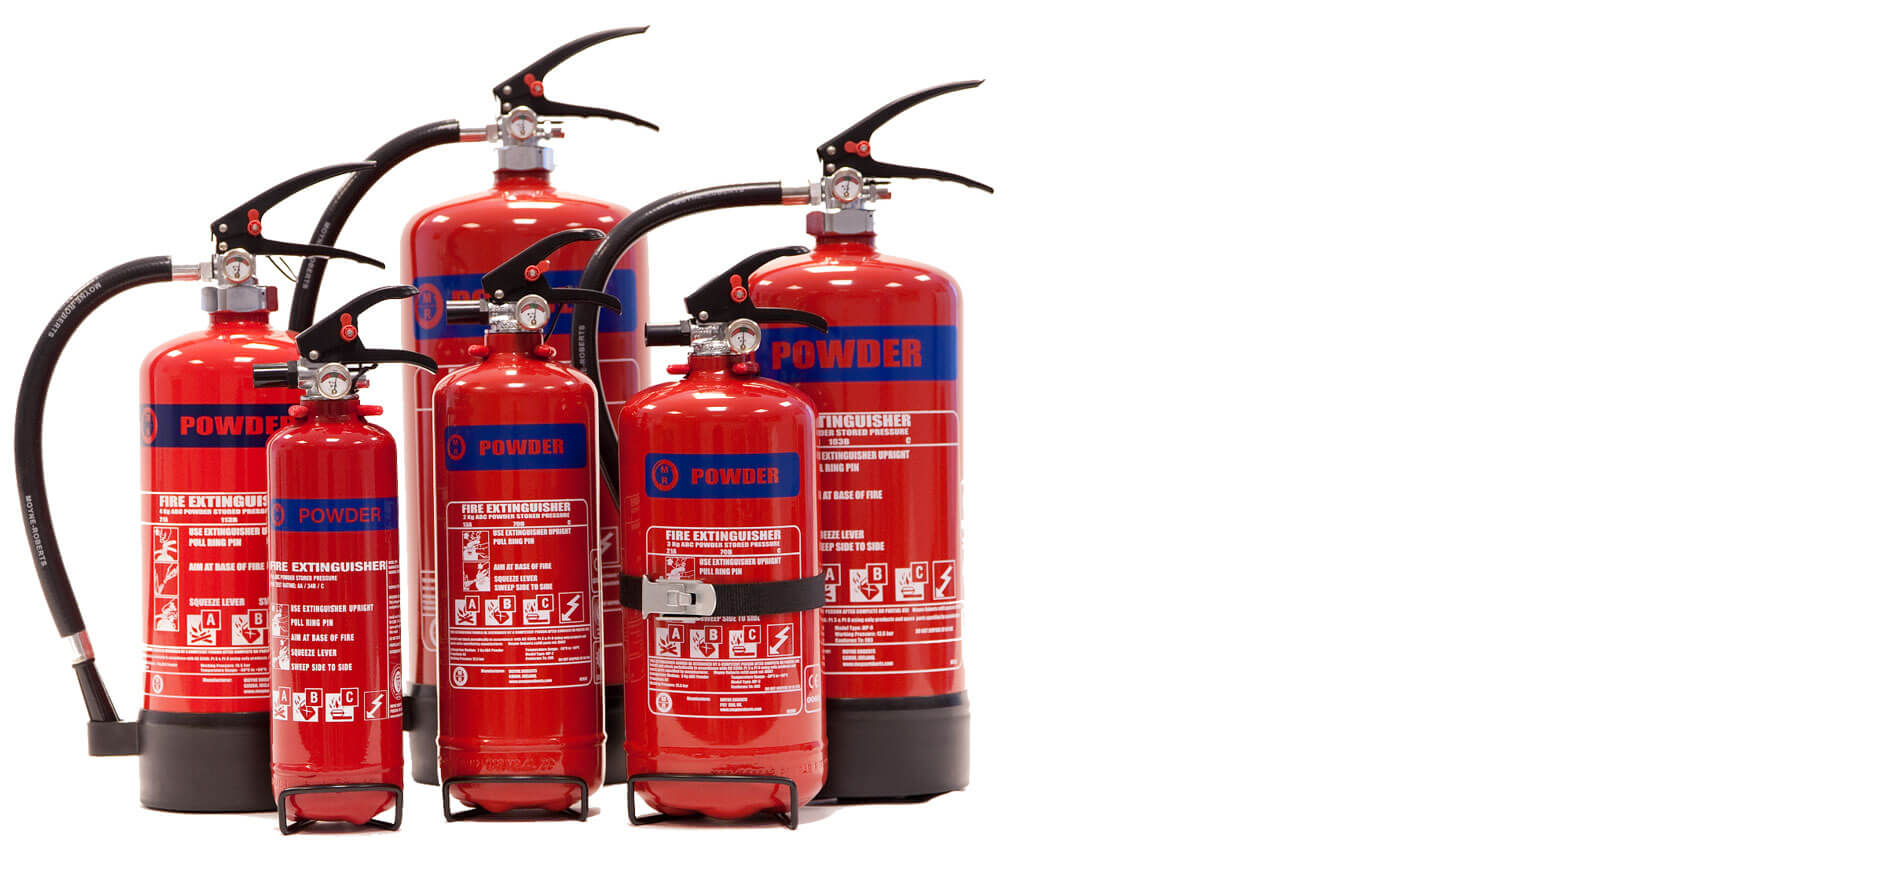 What Fires Are Powder Extinguishers Best Suited To?